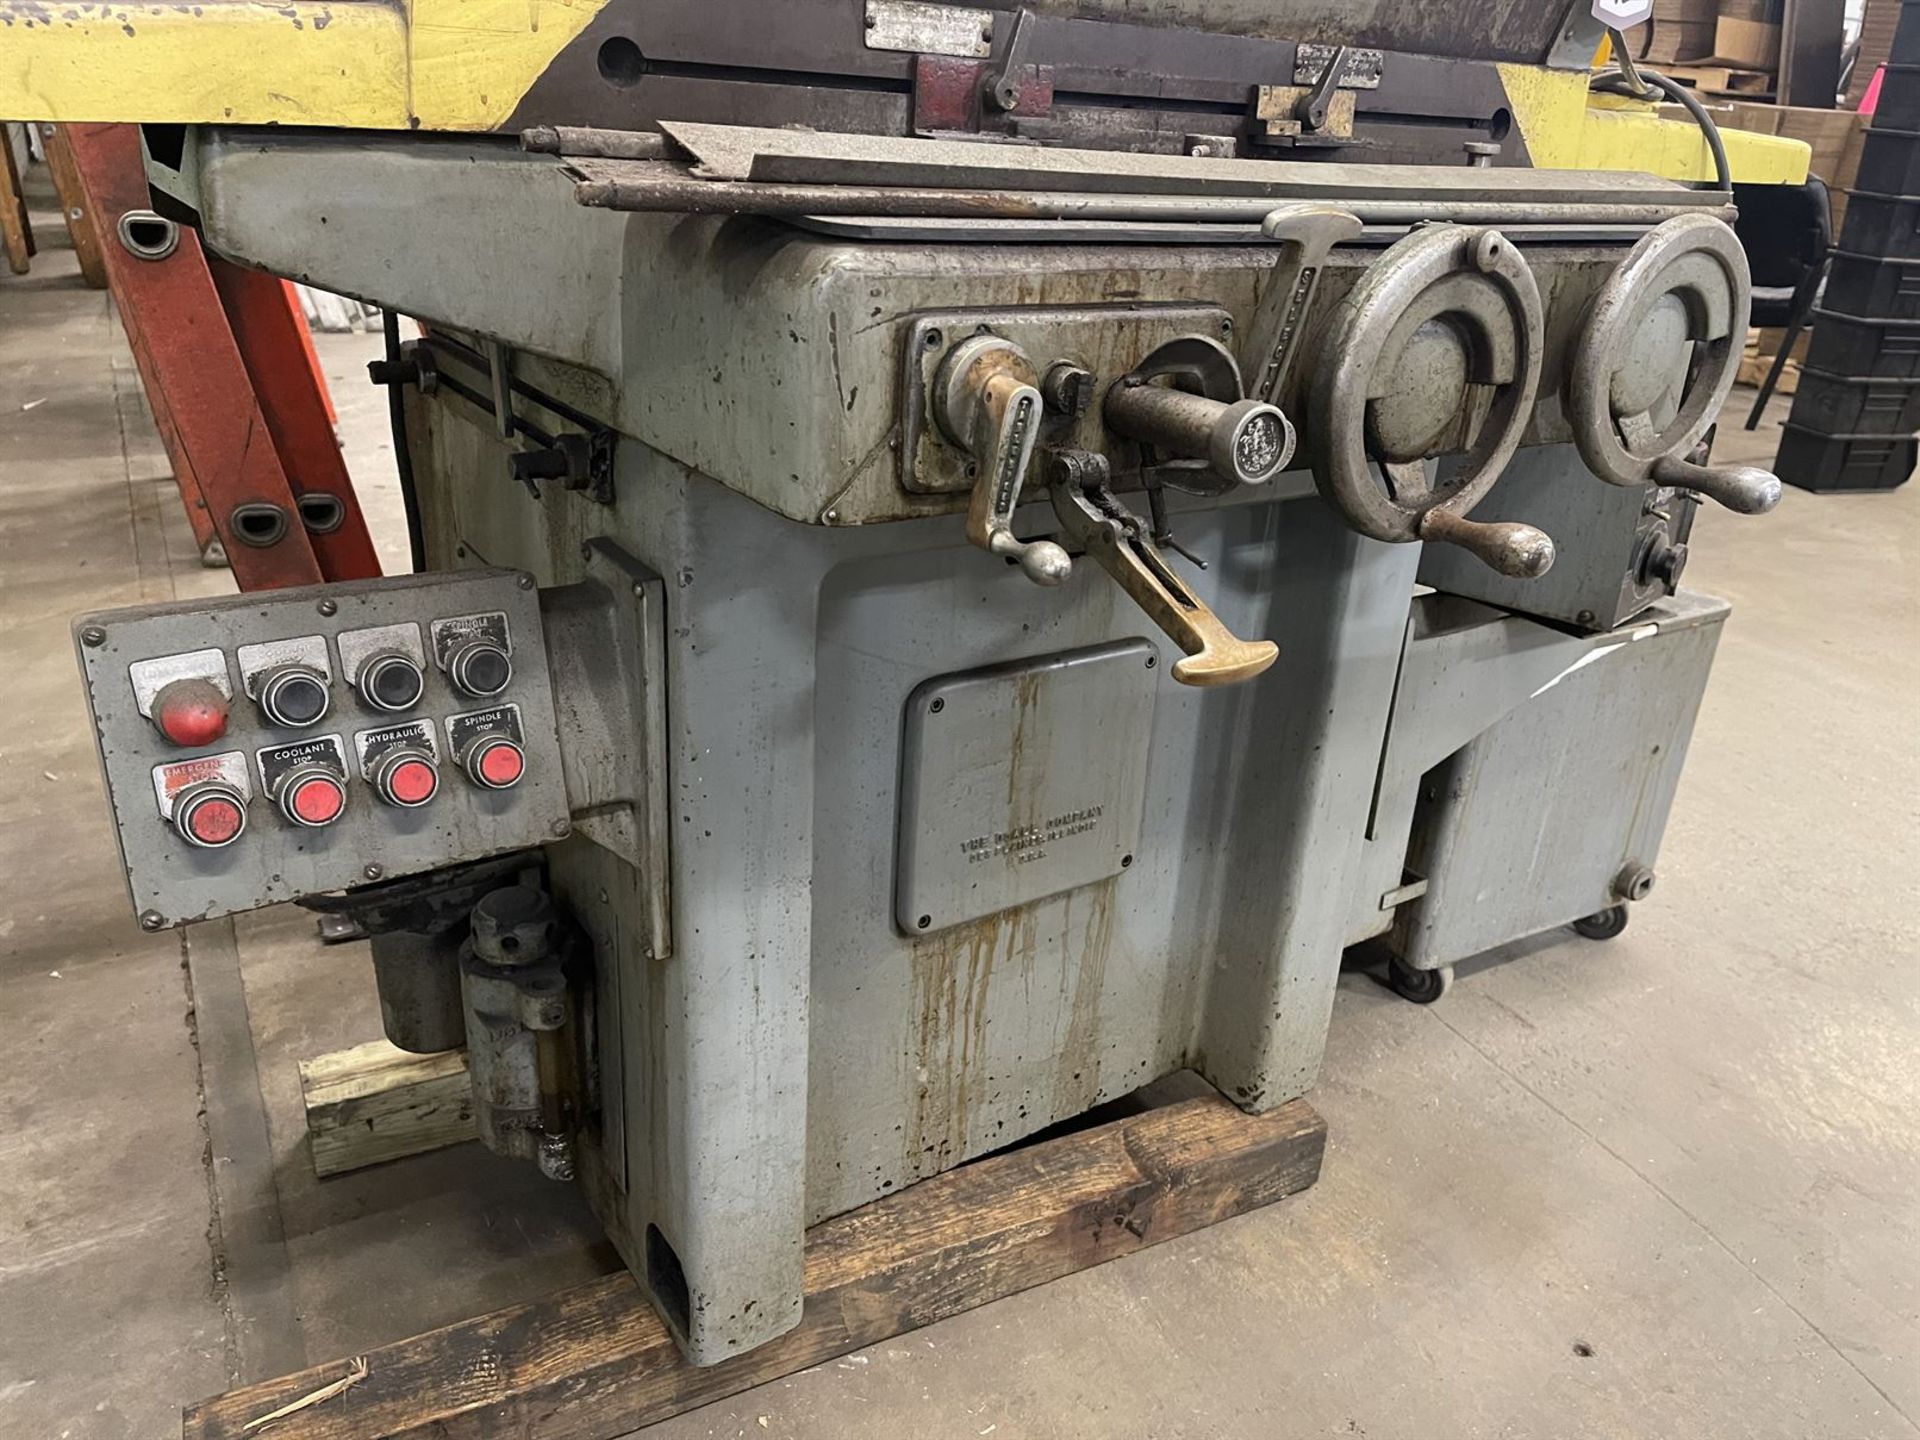 DOALL D618-7 Surface Grinder, s/n 219-75709, 6" x 18" Magnetic Chuck, Power Feed, DoAll Selectron - Image 5 of 7